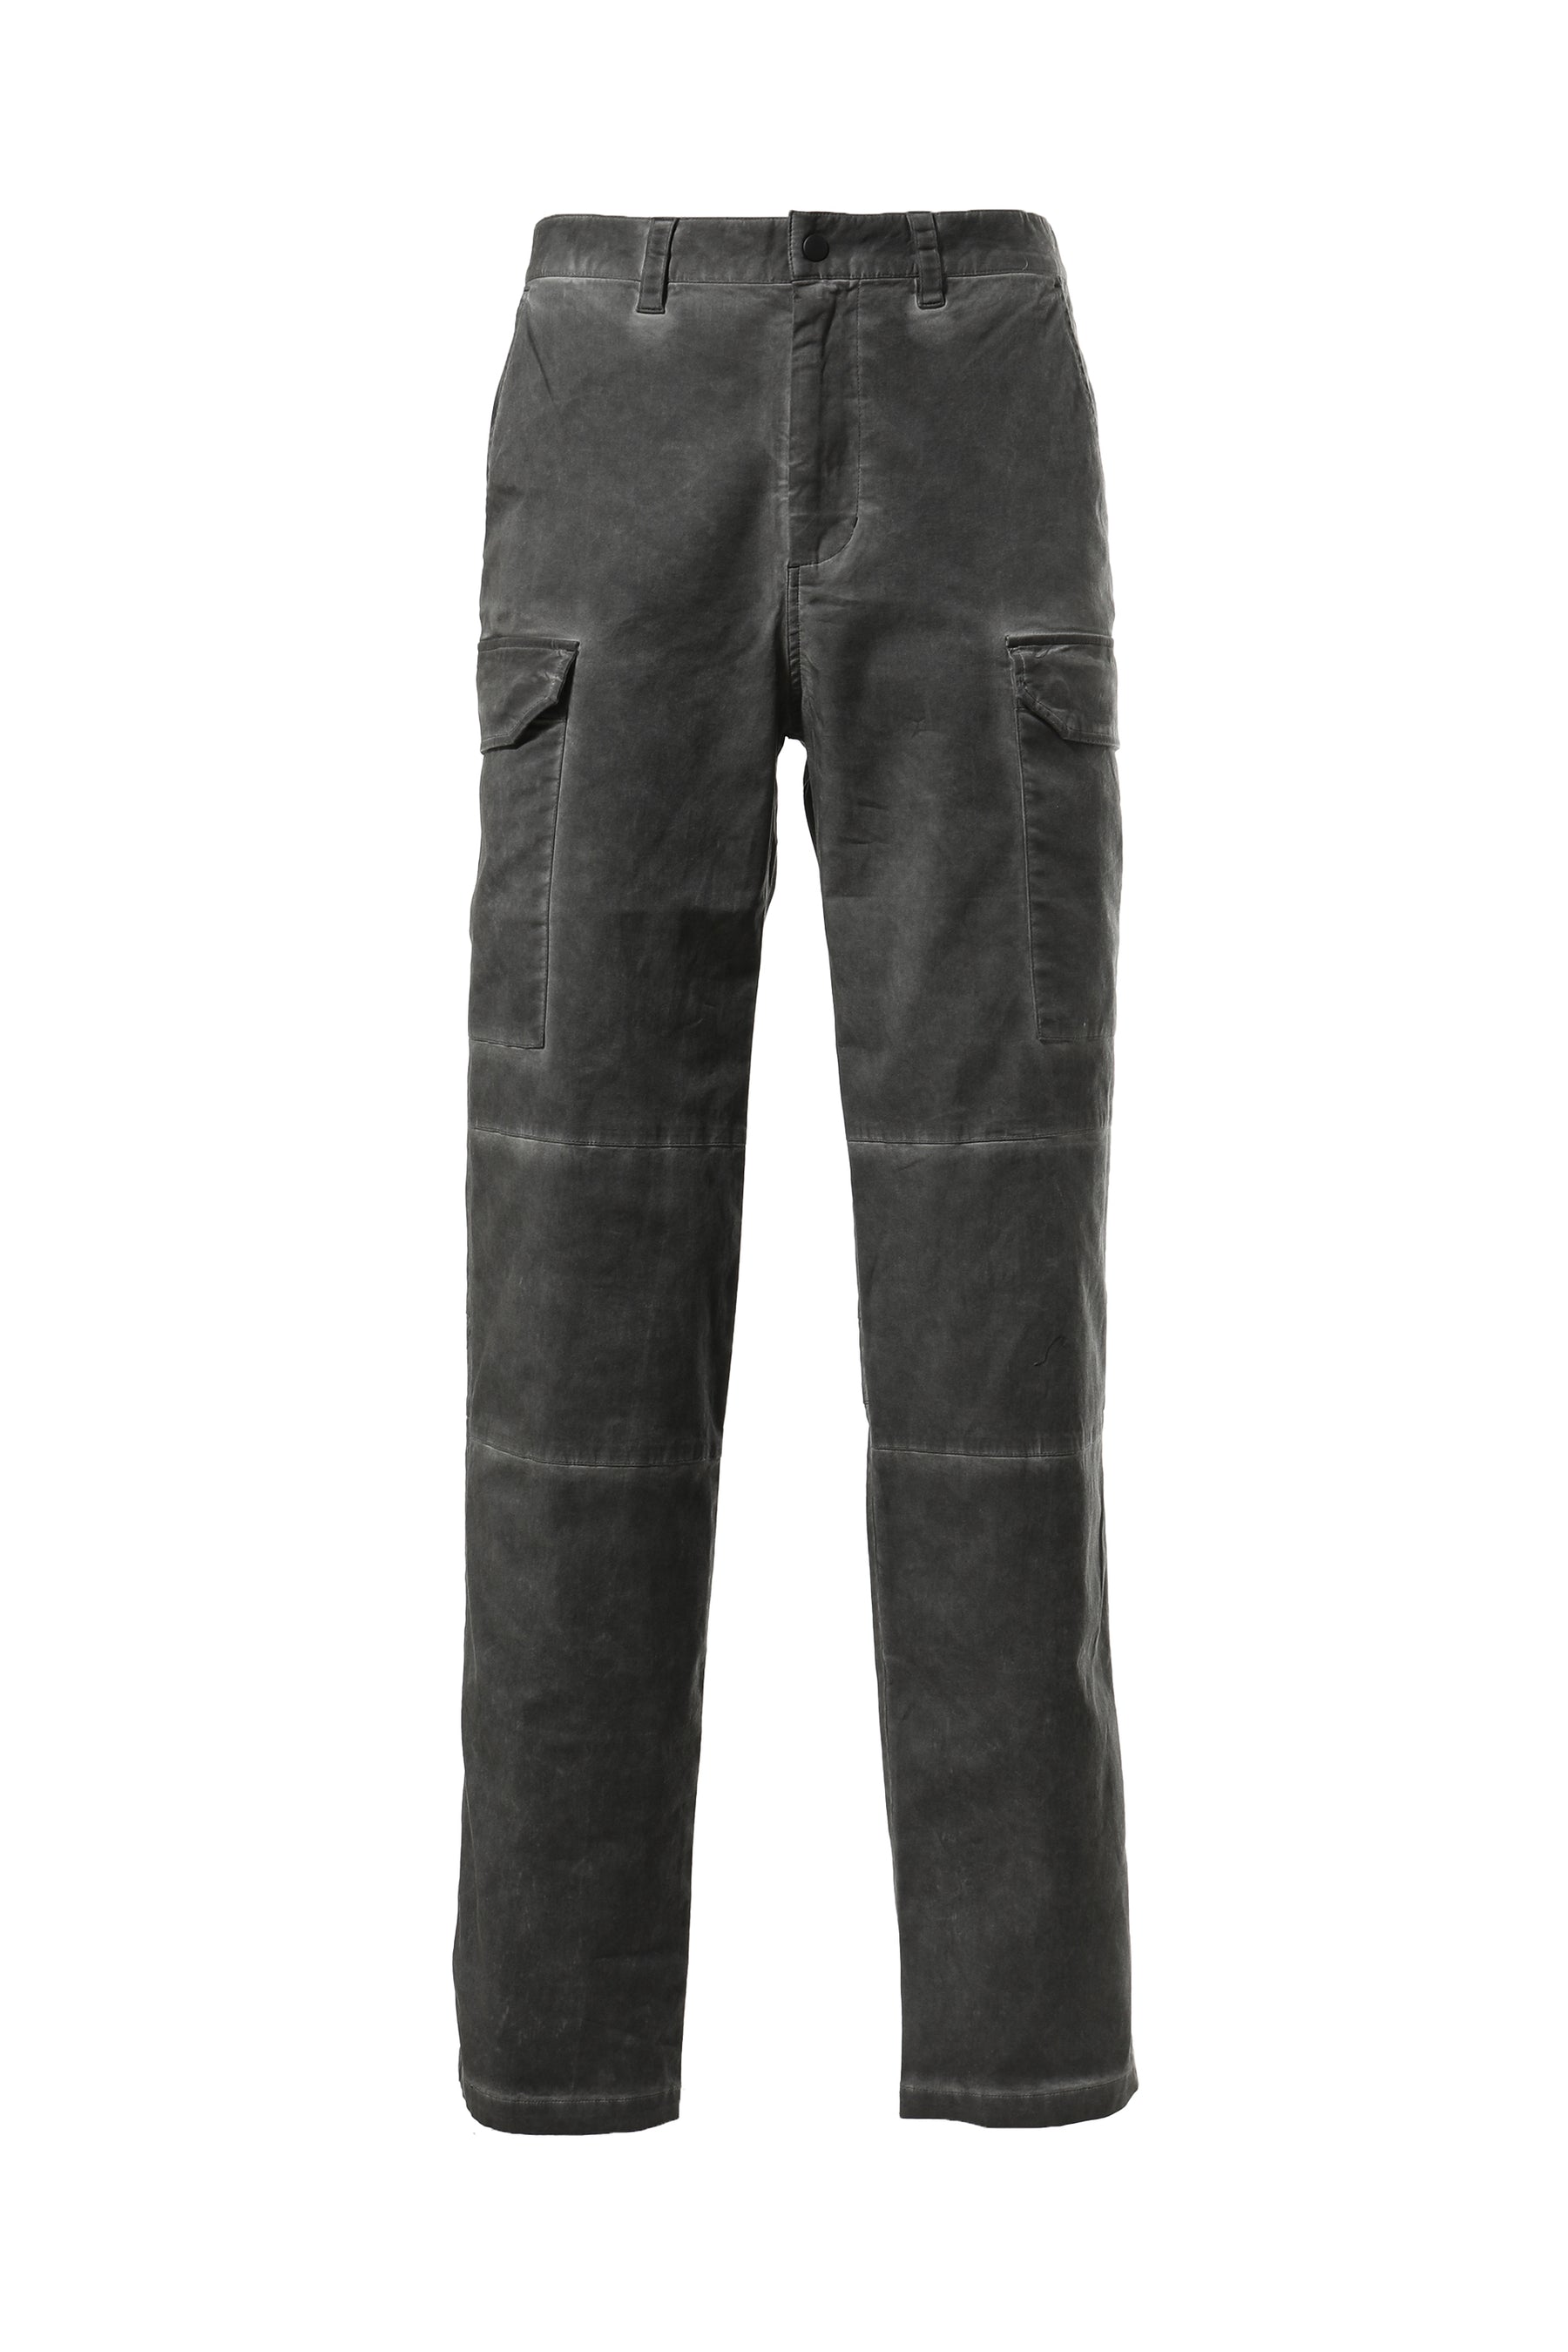 OIL WASHED CARGO PANT / BLK